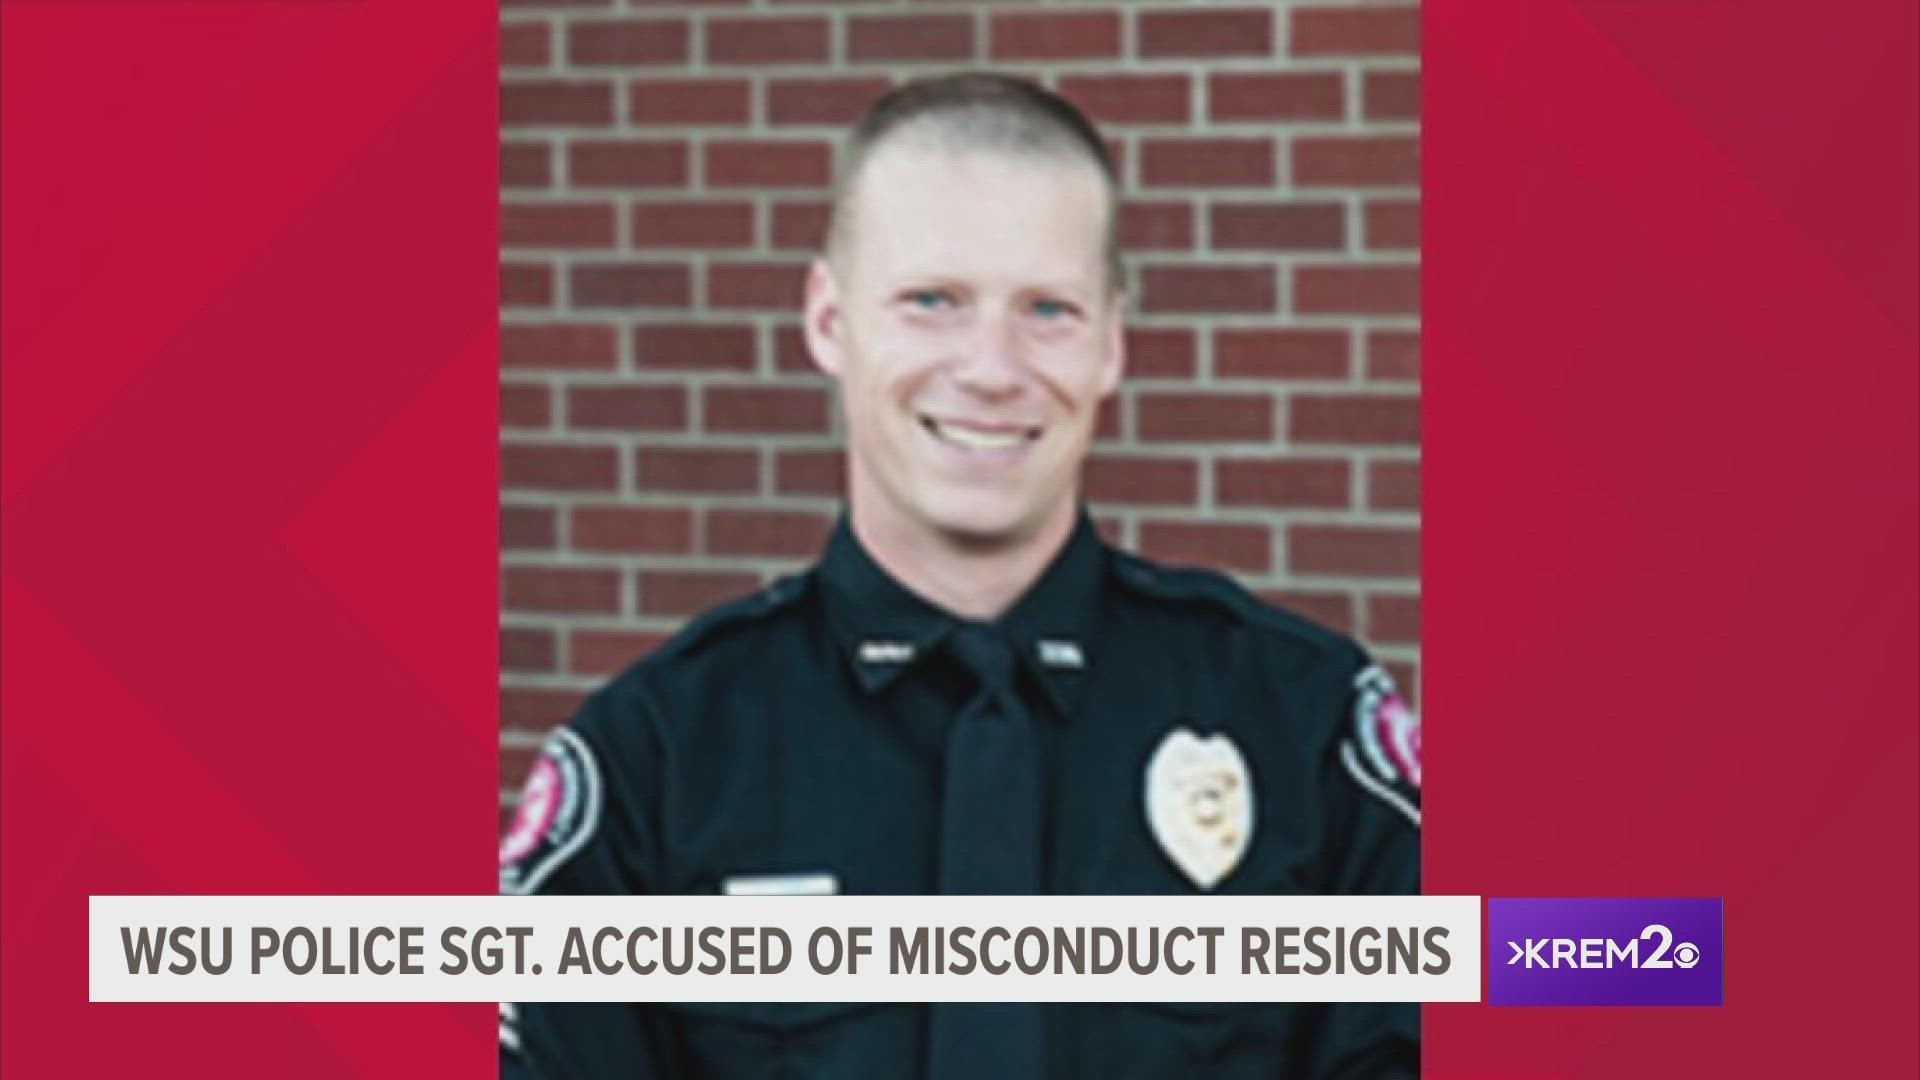 WSU Police Sgt. Matt Kuhrt was facing disciplinary proceedings after allegedly engaging in inappropriate activity while on duty and on Pullman campus property.